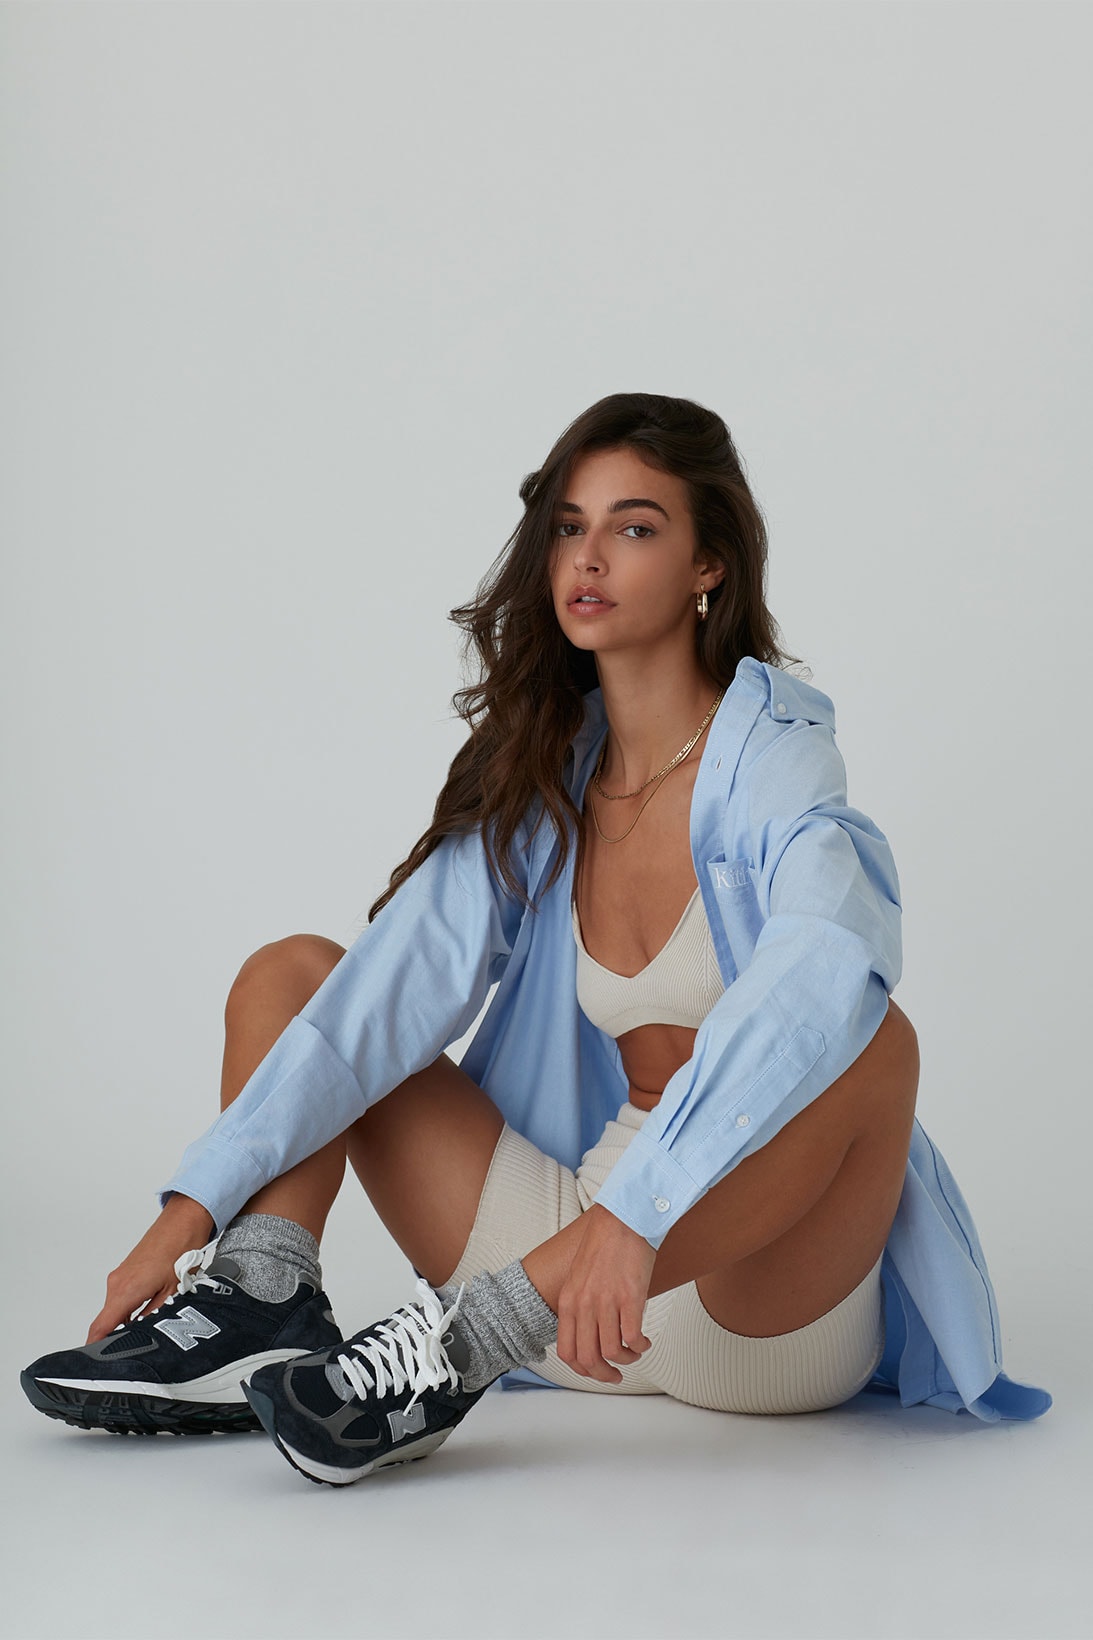 kith women spring 2021 collection shirt bra top new balance sneakers shorts